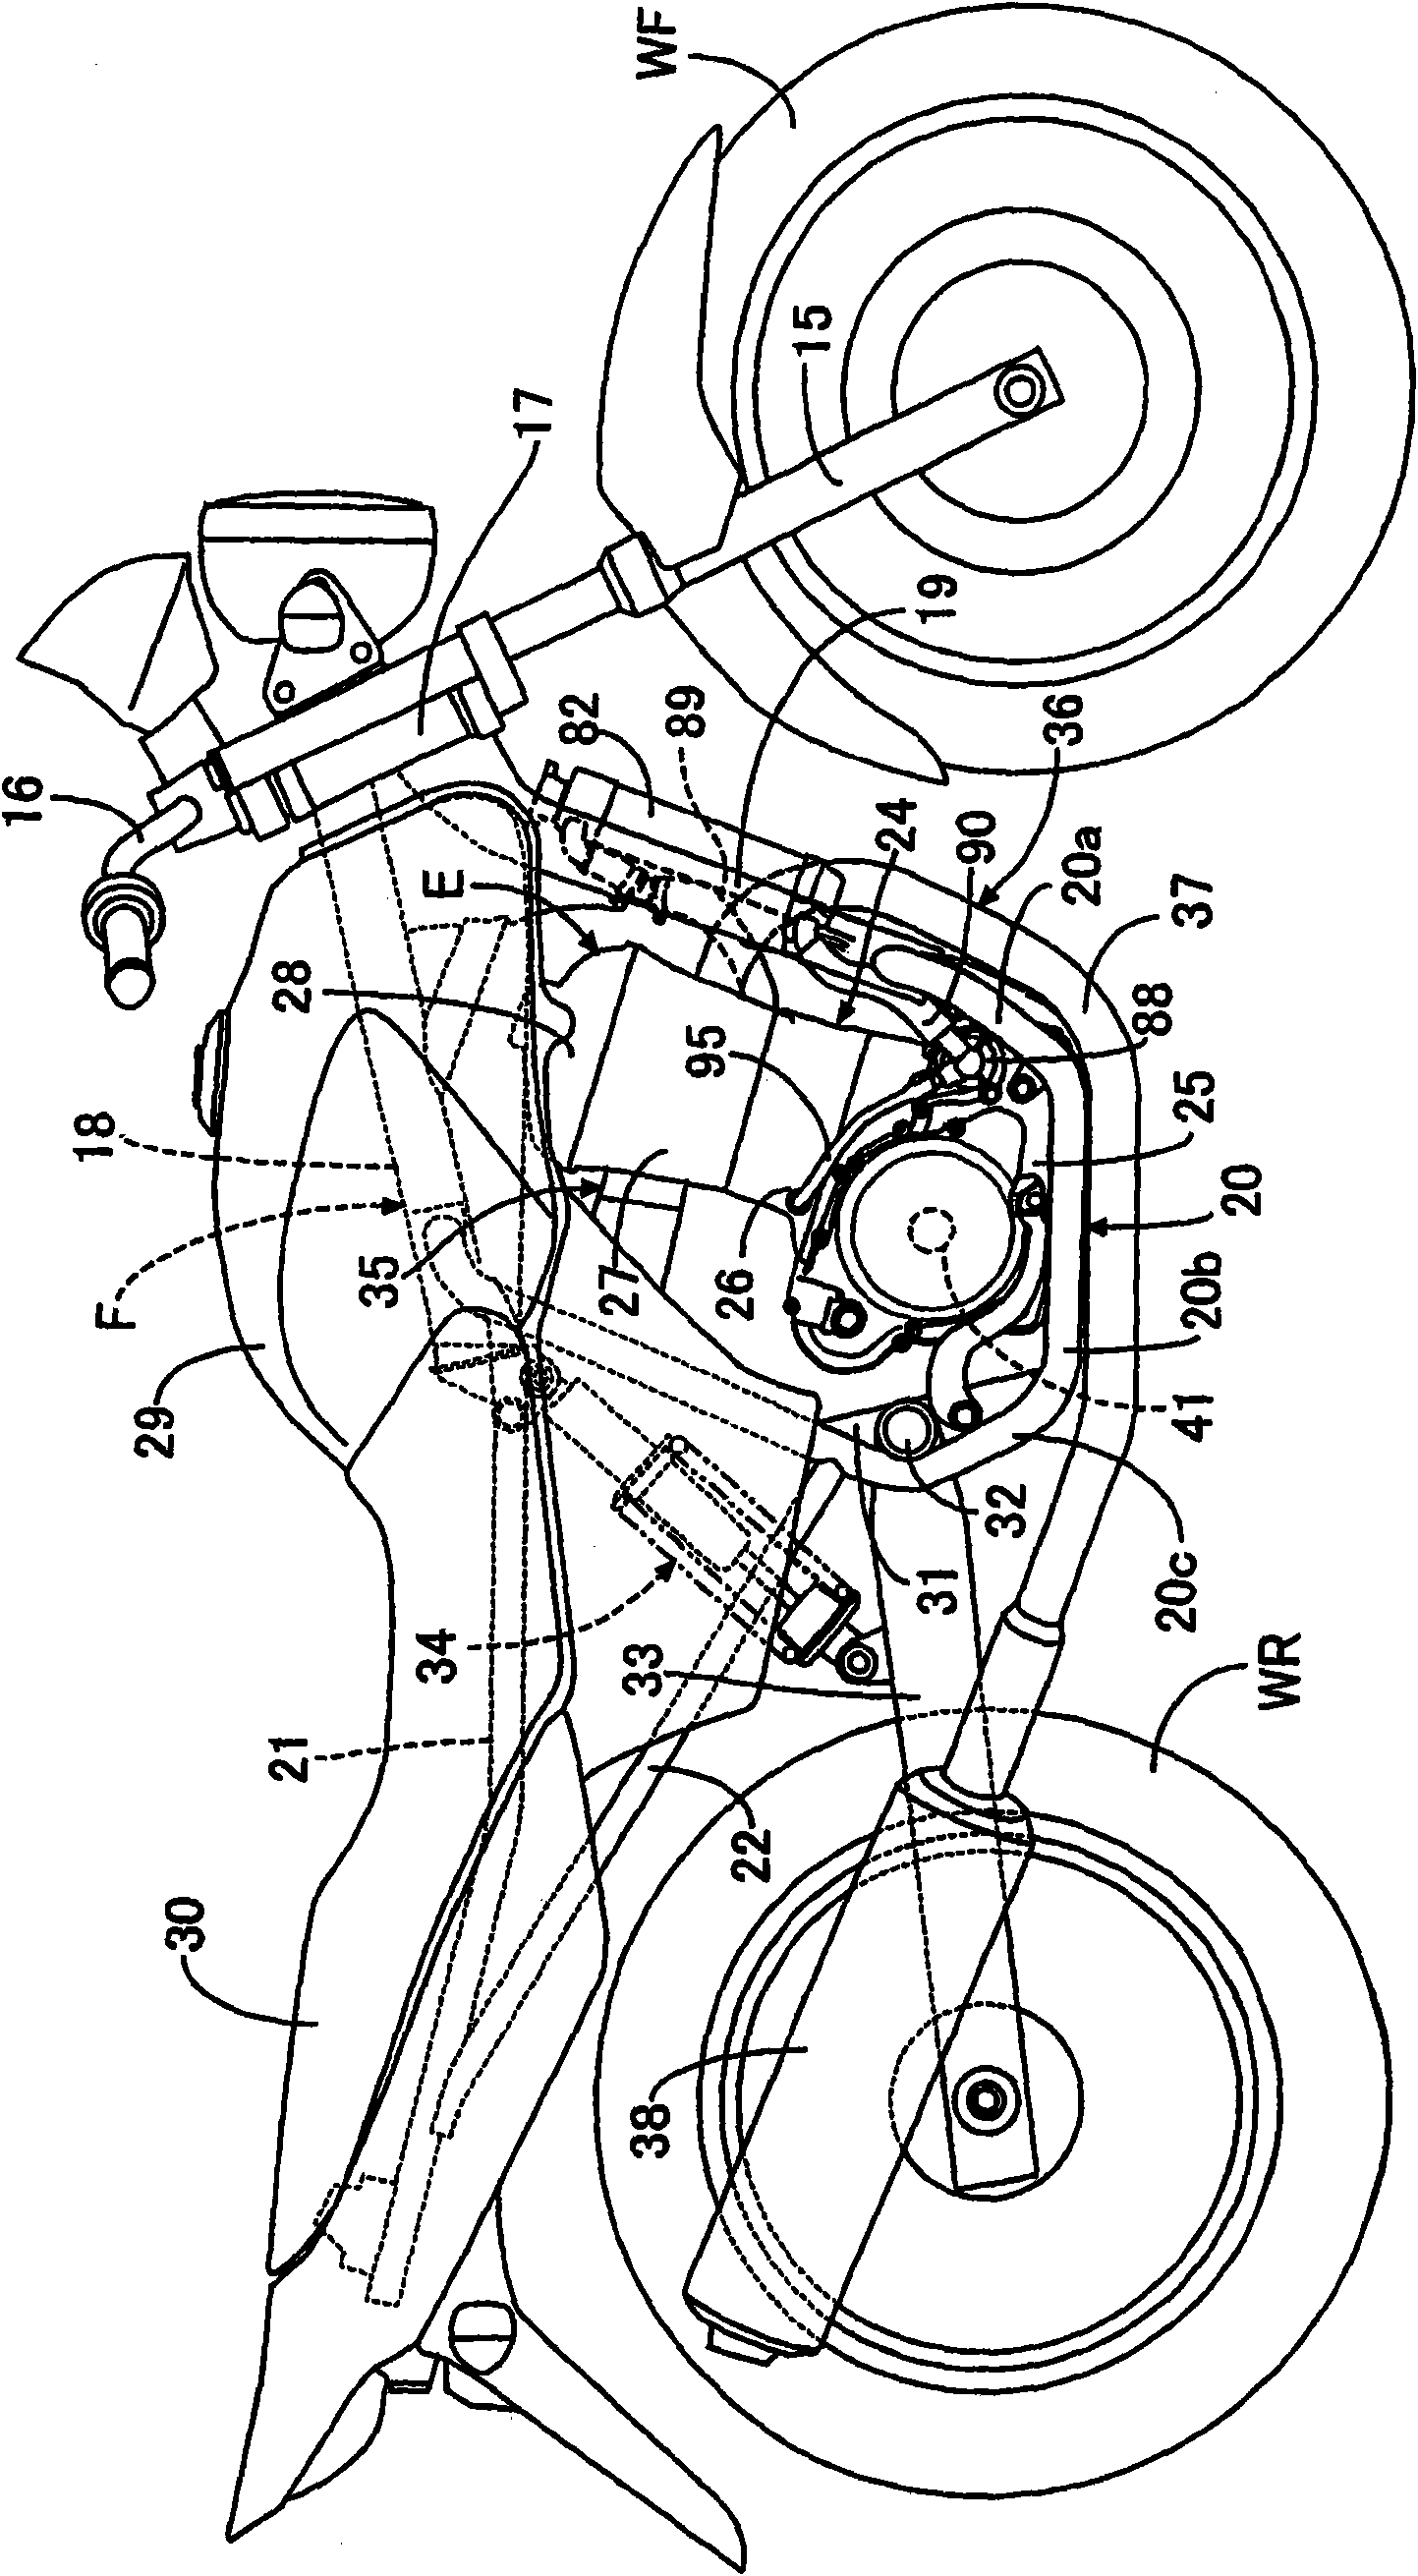 Water-cooled internal combustion engine for vehicle